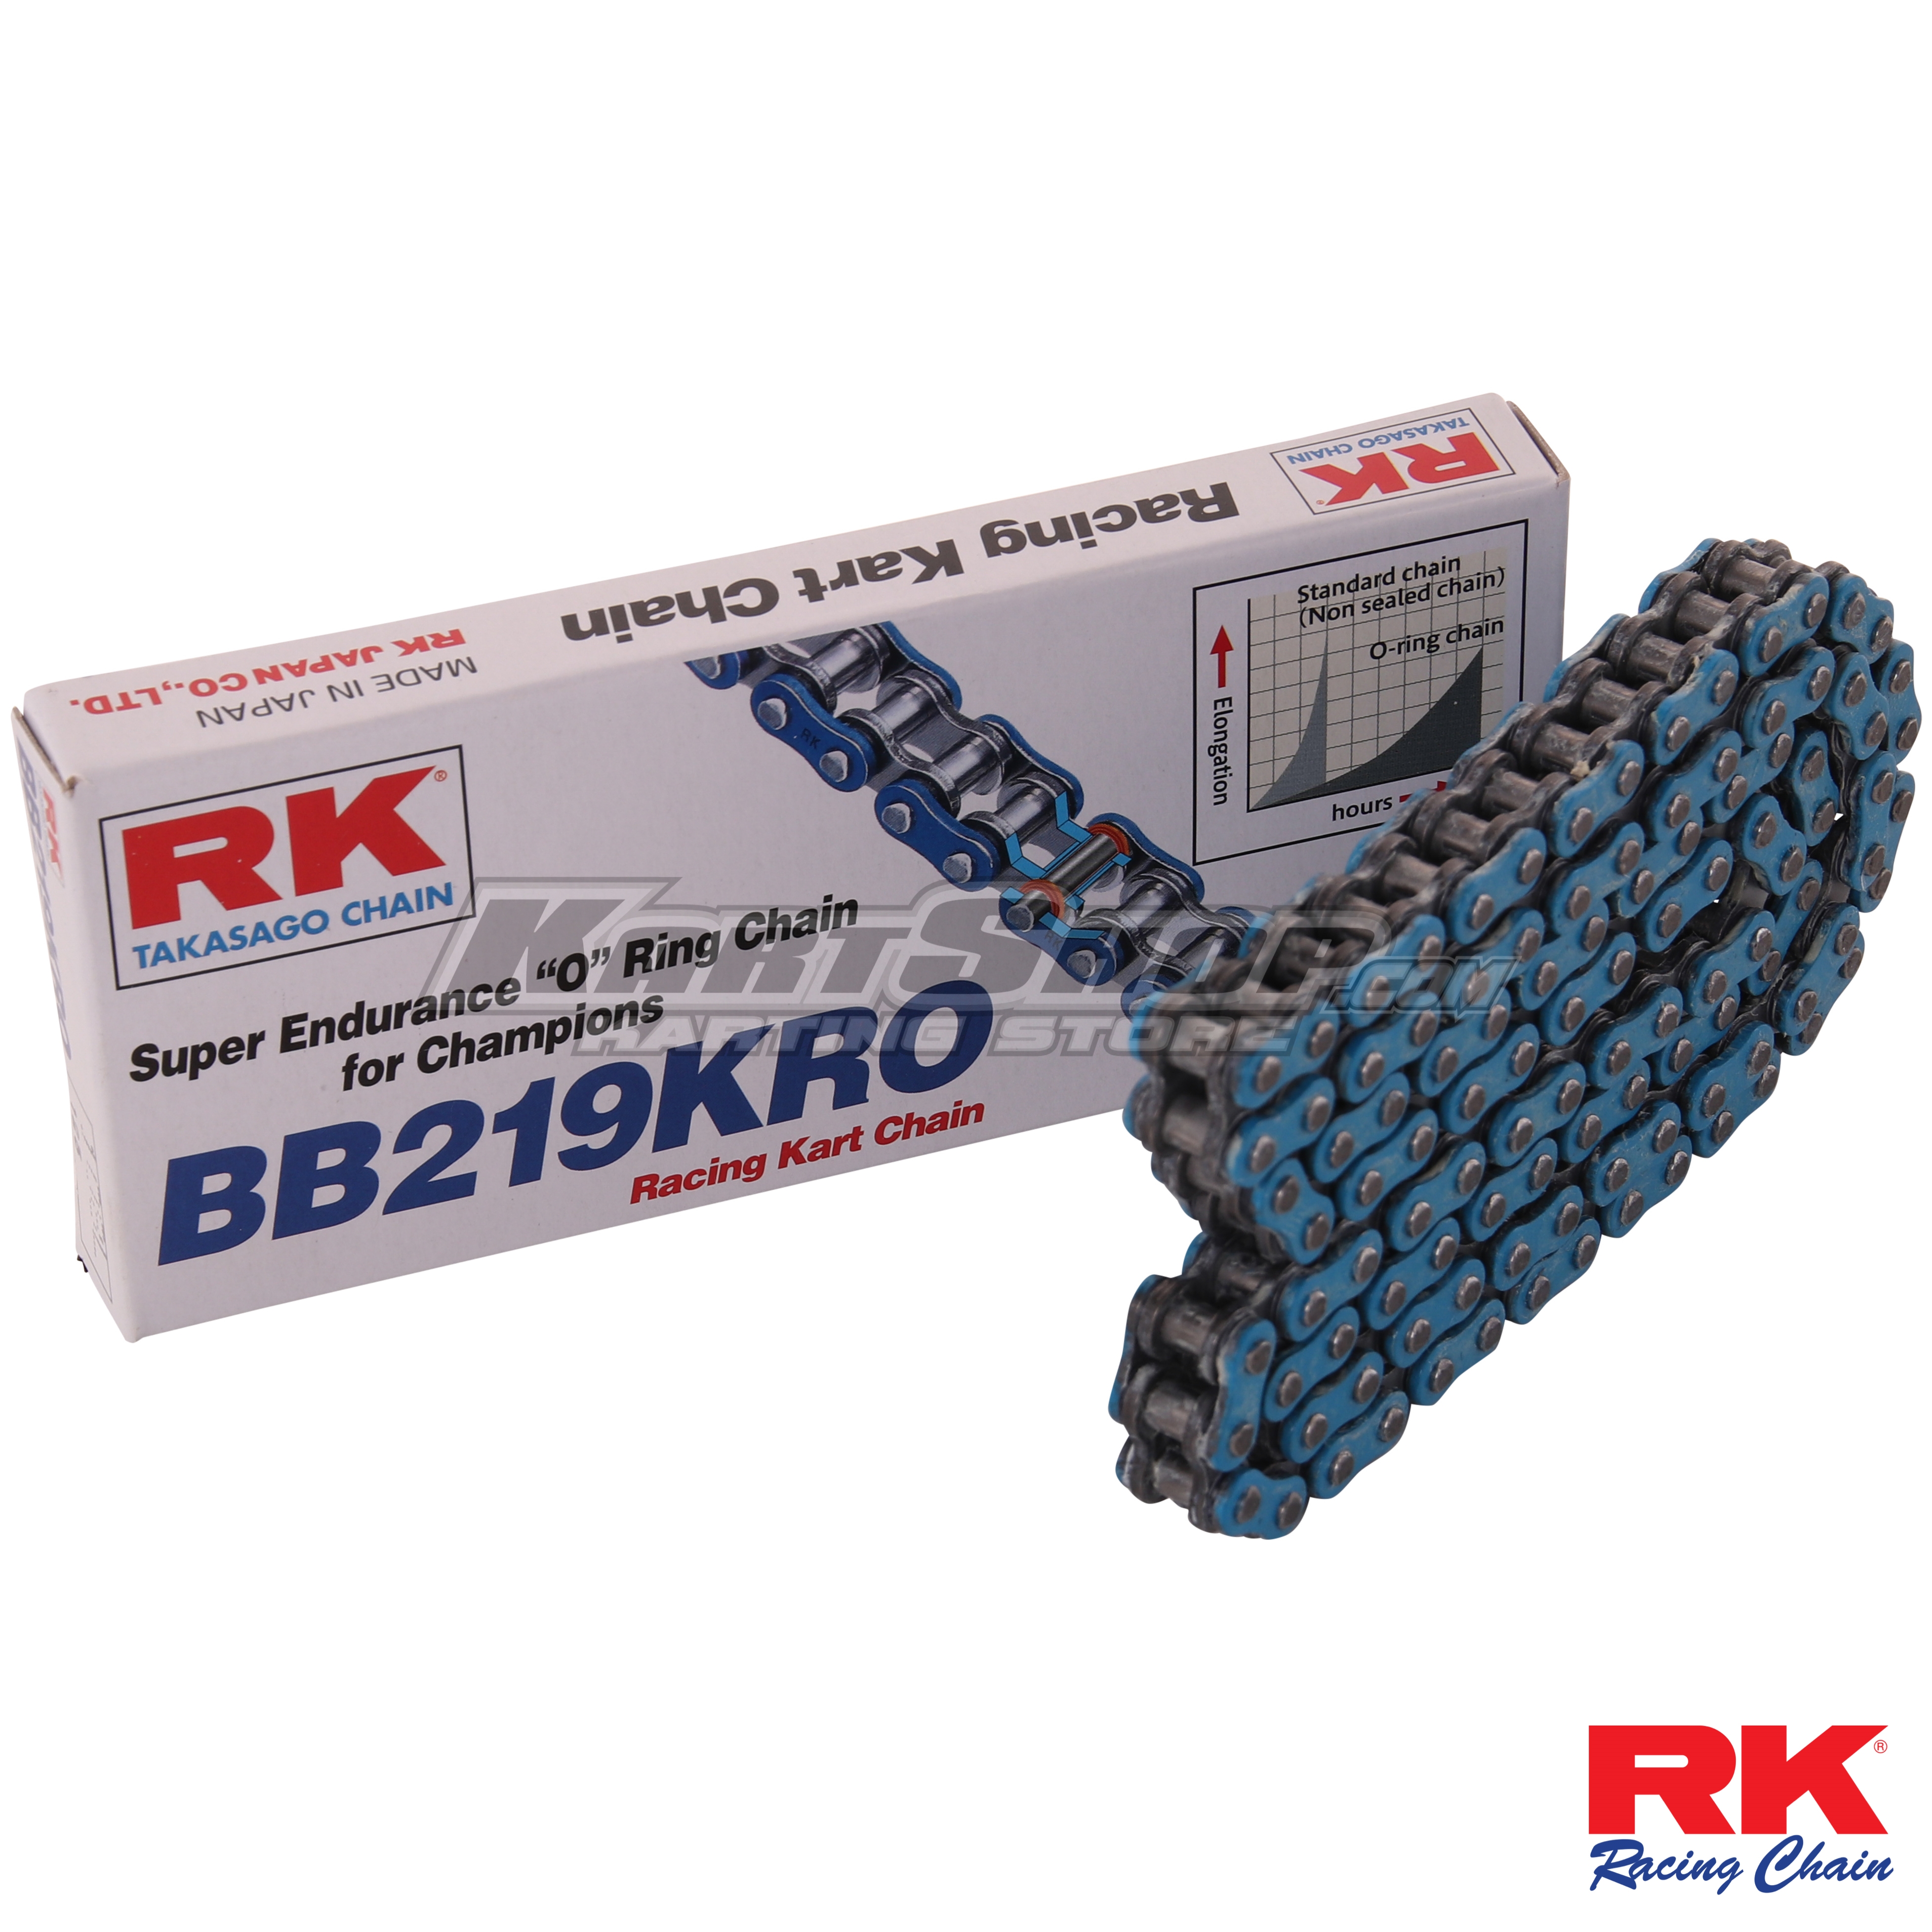 RK o-ring chain with 104 links